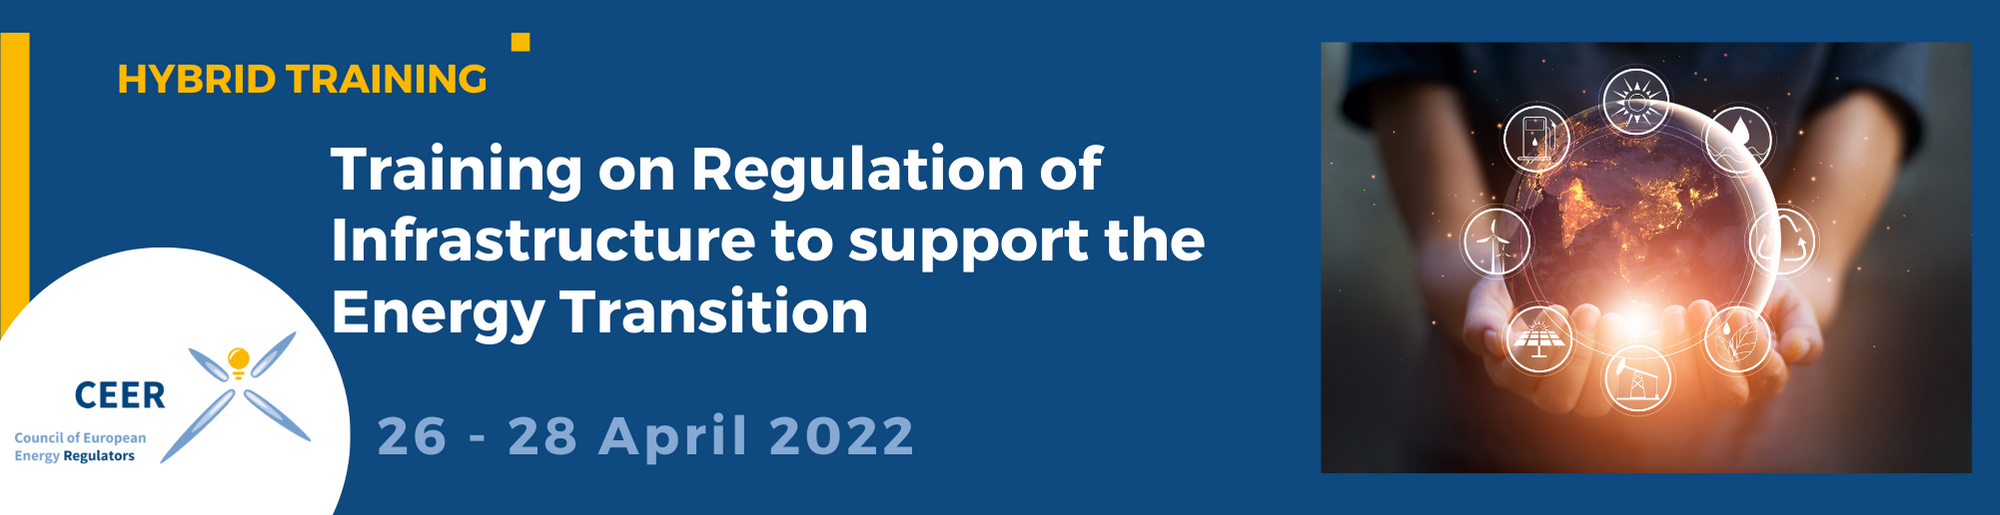 Regulation of Infrastructure to support the Energy Transition